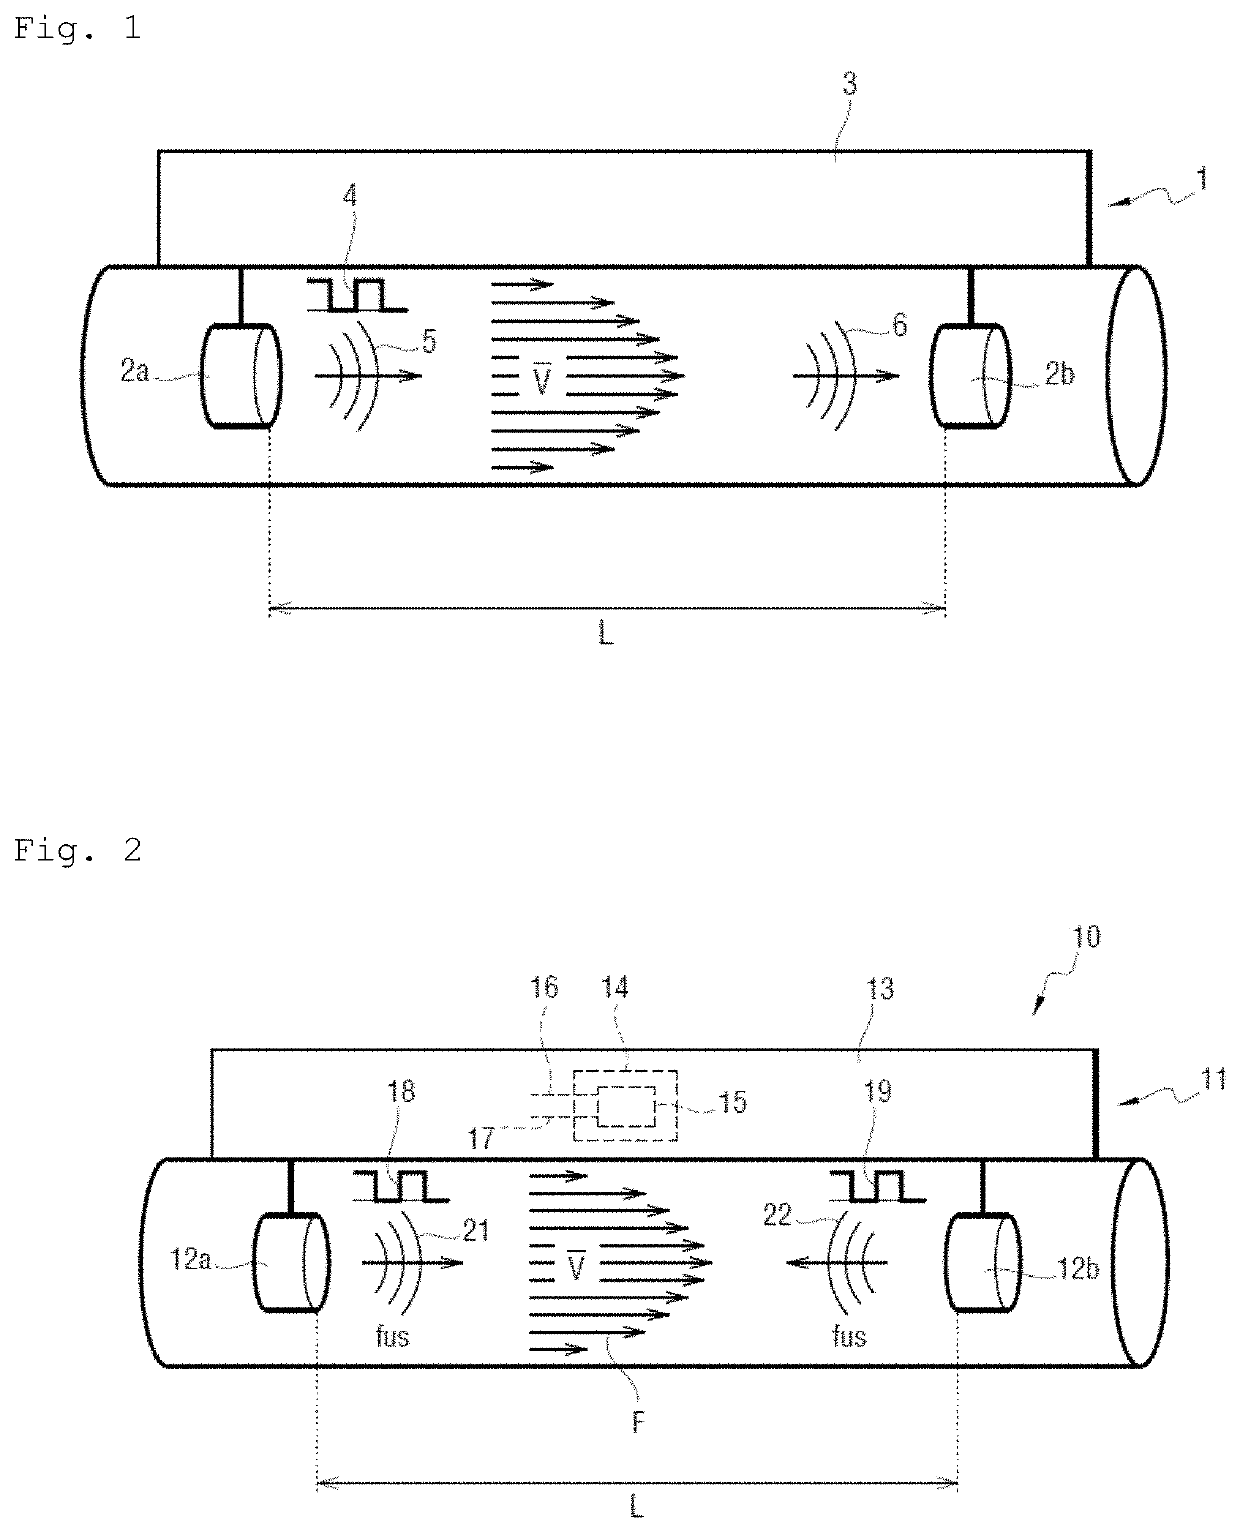 Method of measuring the speed of a fluid